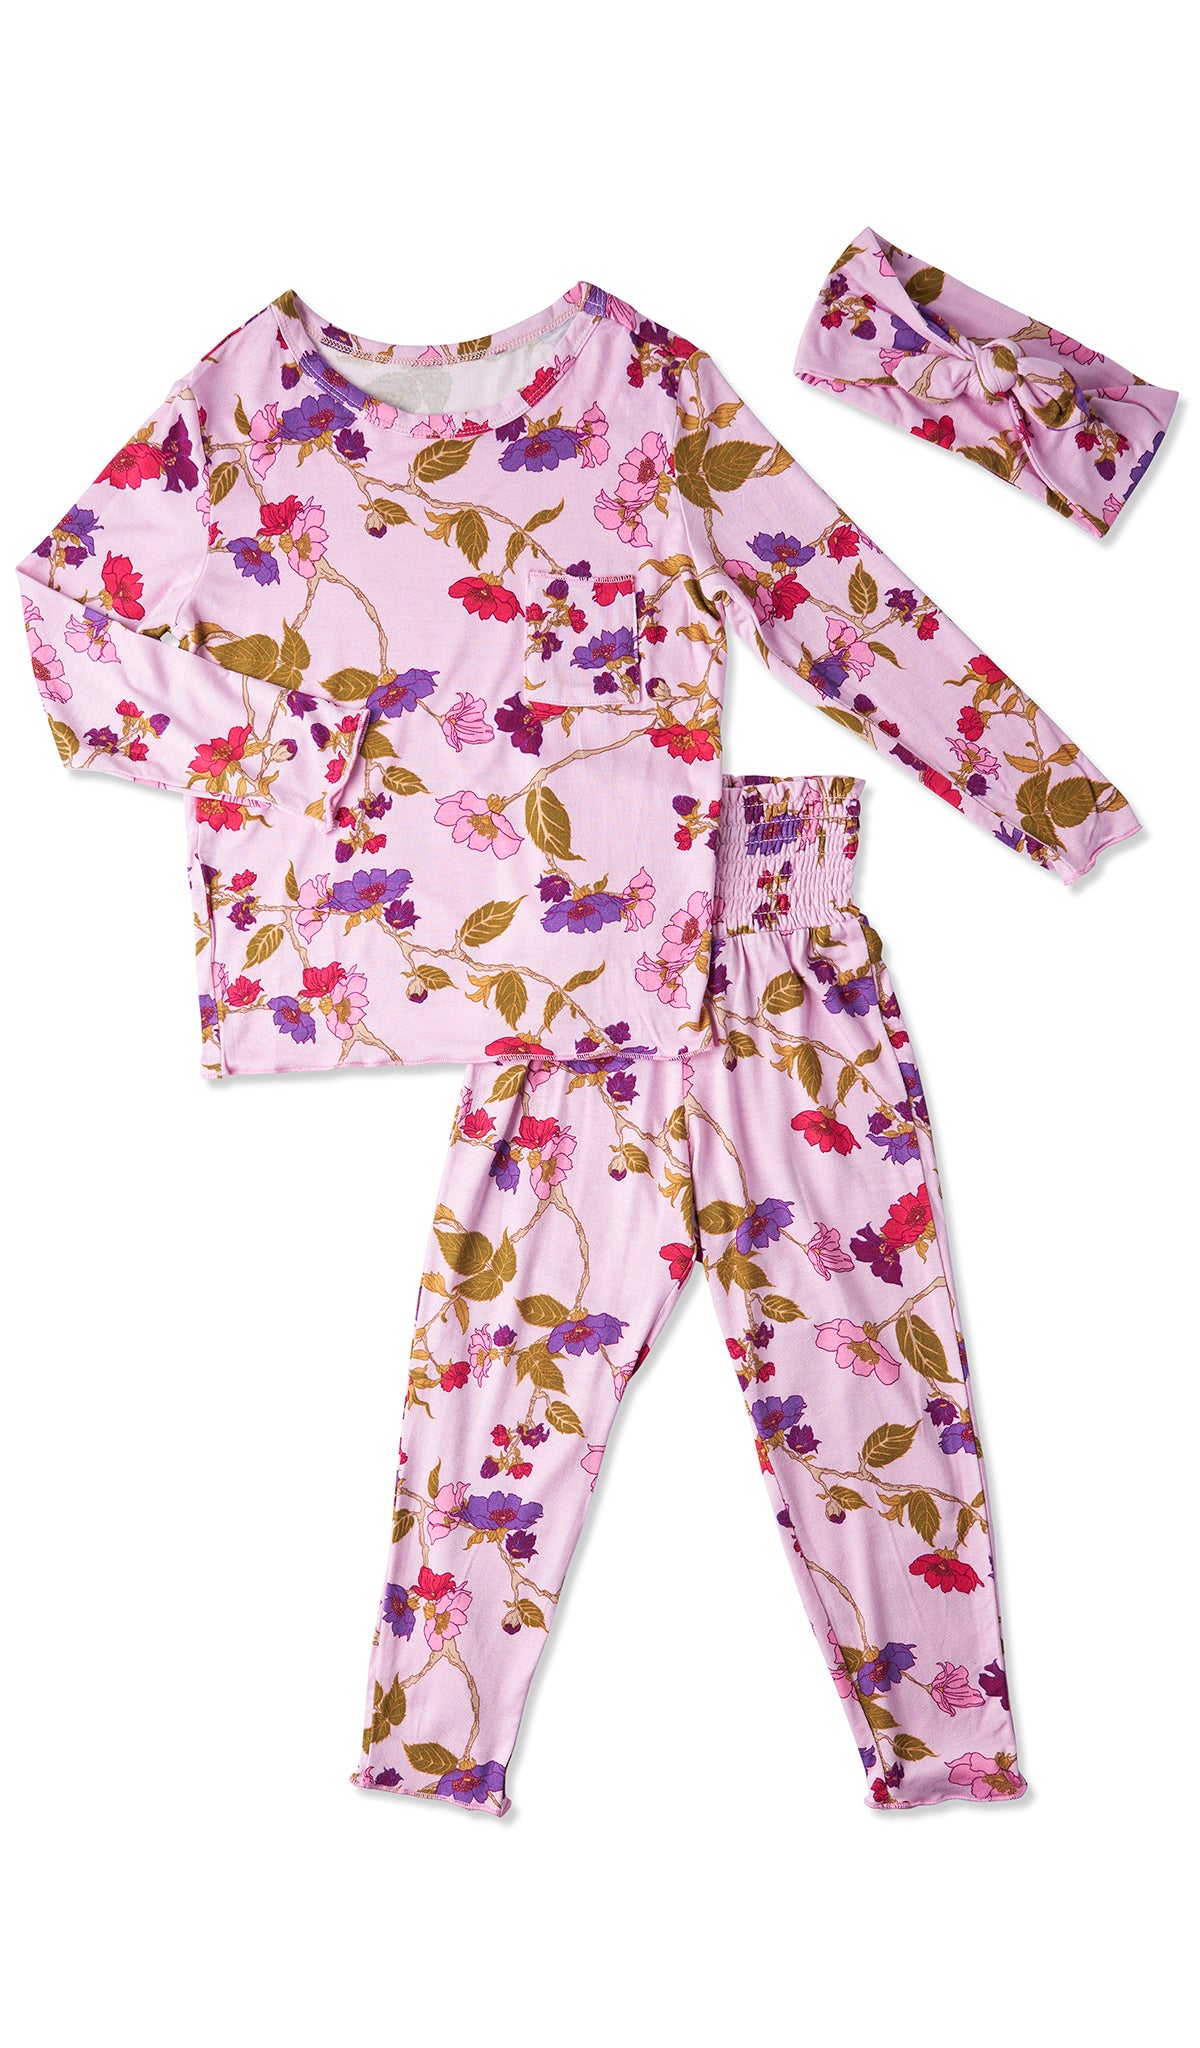 Lavender Rose Charlie Kids 3-Piece Pant PJ. Long sleeve top with smocked waistband pant and matching headwrap. Lettuce trim detail on sleeve edge, top and pant hem.